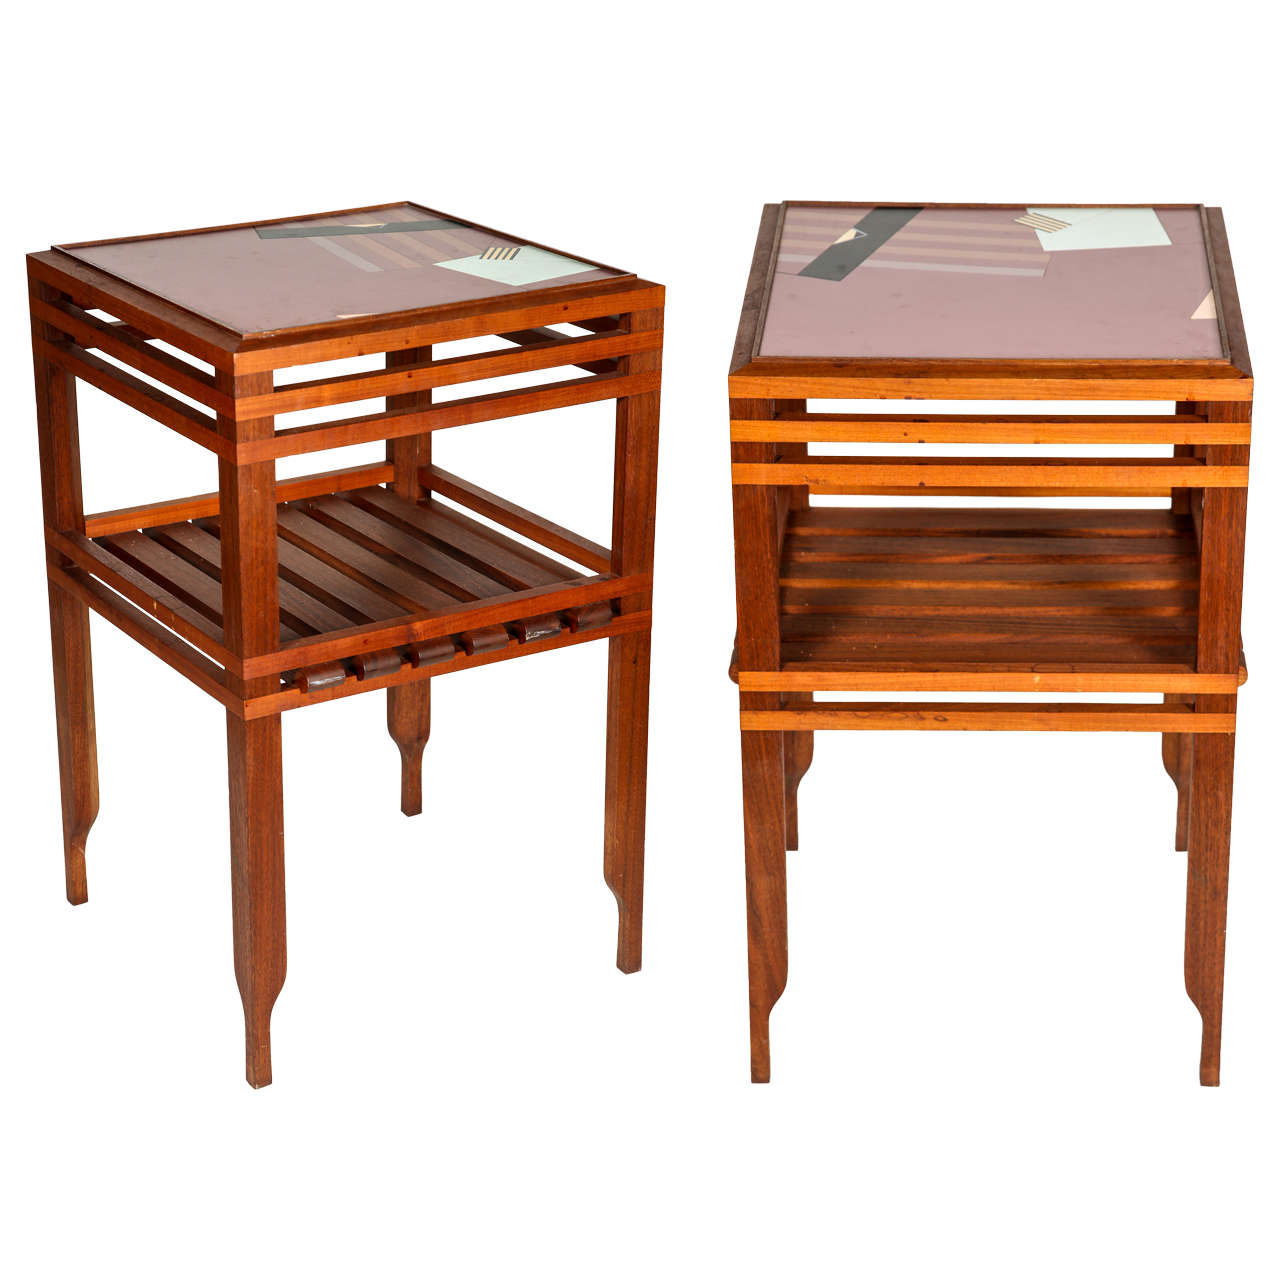 Pair of Mid-Century Modern Design End Tables or Studio Tables